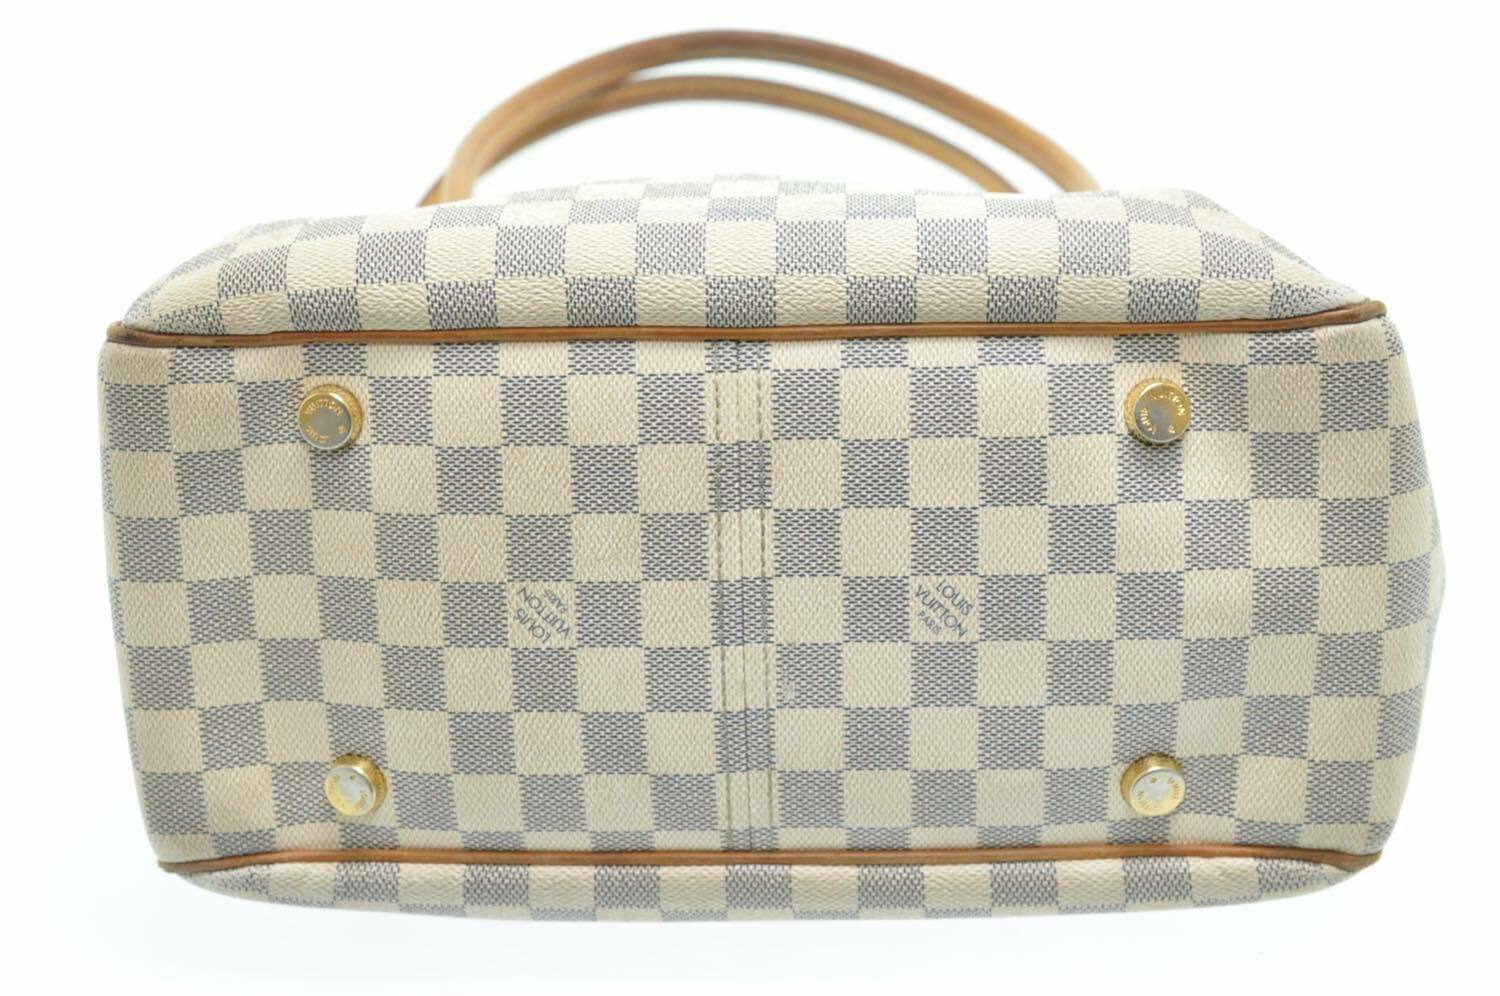 LV GALLERIA PM!!! Damier Ebene OR Damier Azur!! You pick which one